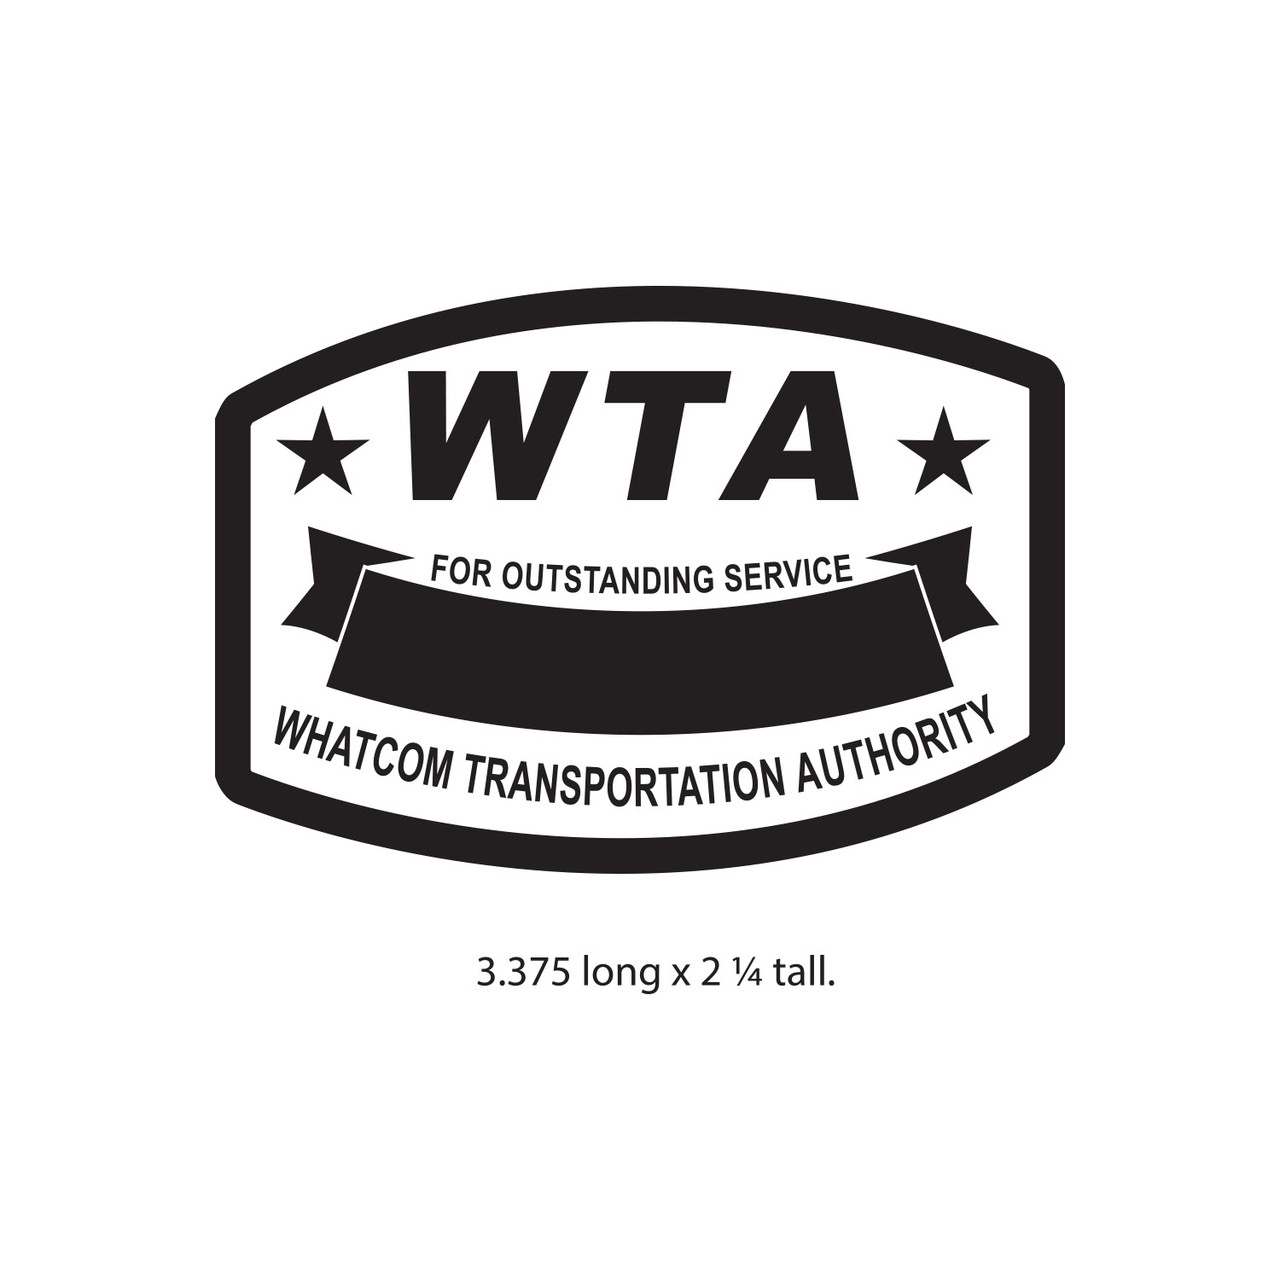 Whatcom Transportation Authority (RESTRICTED)